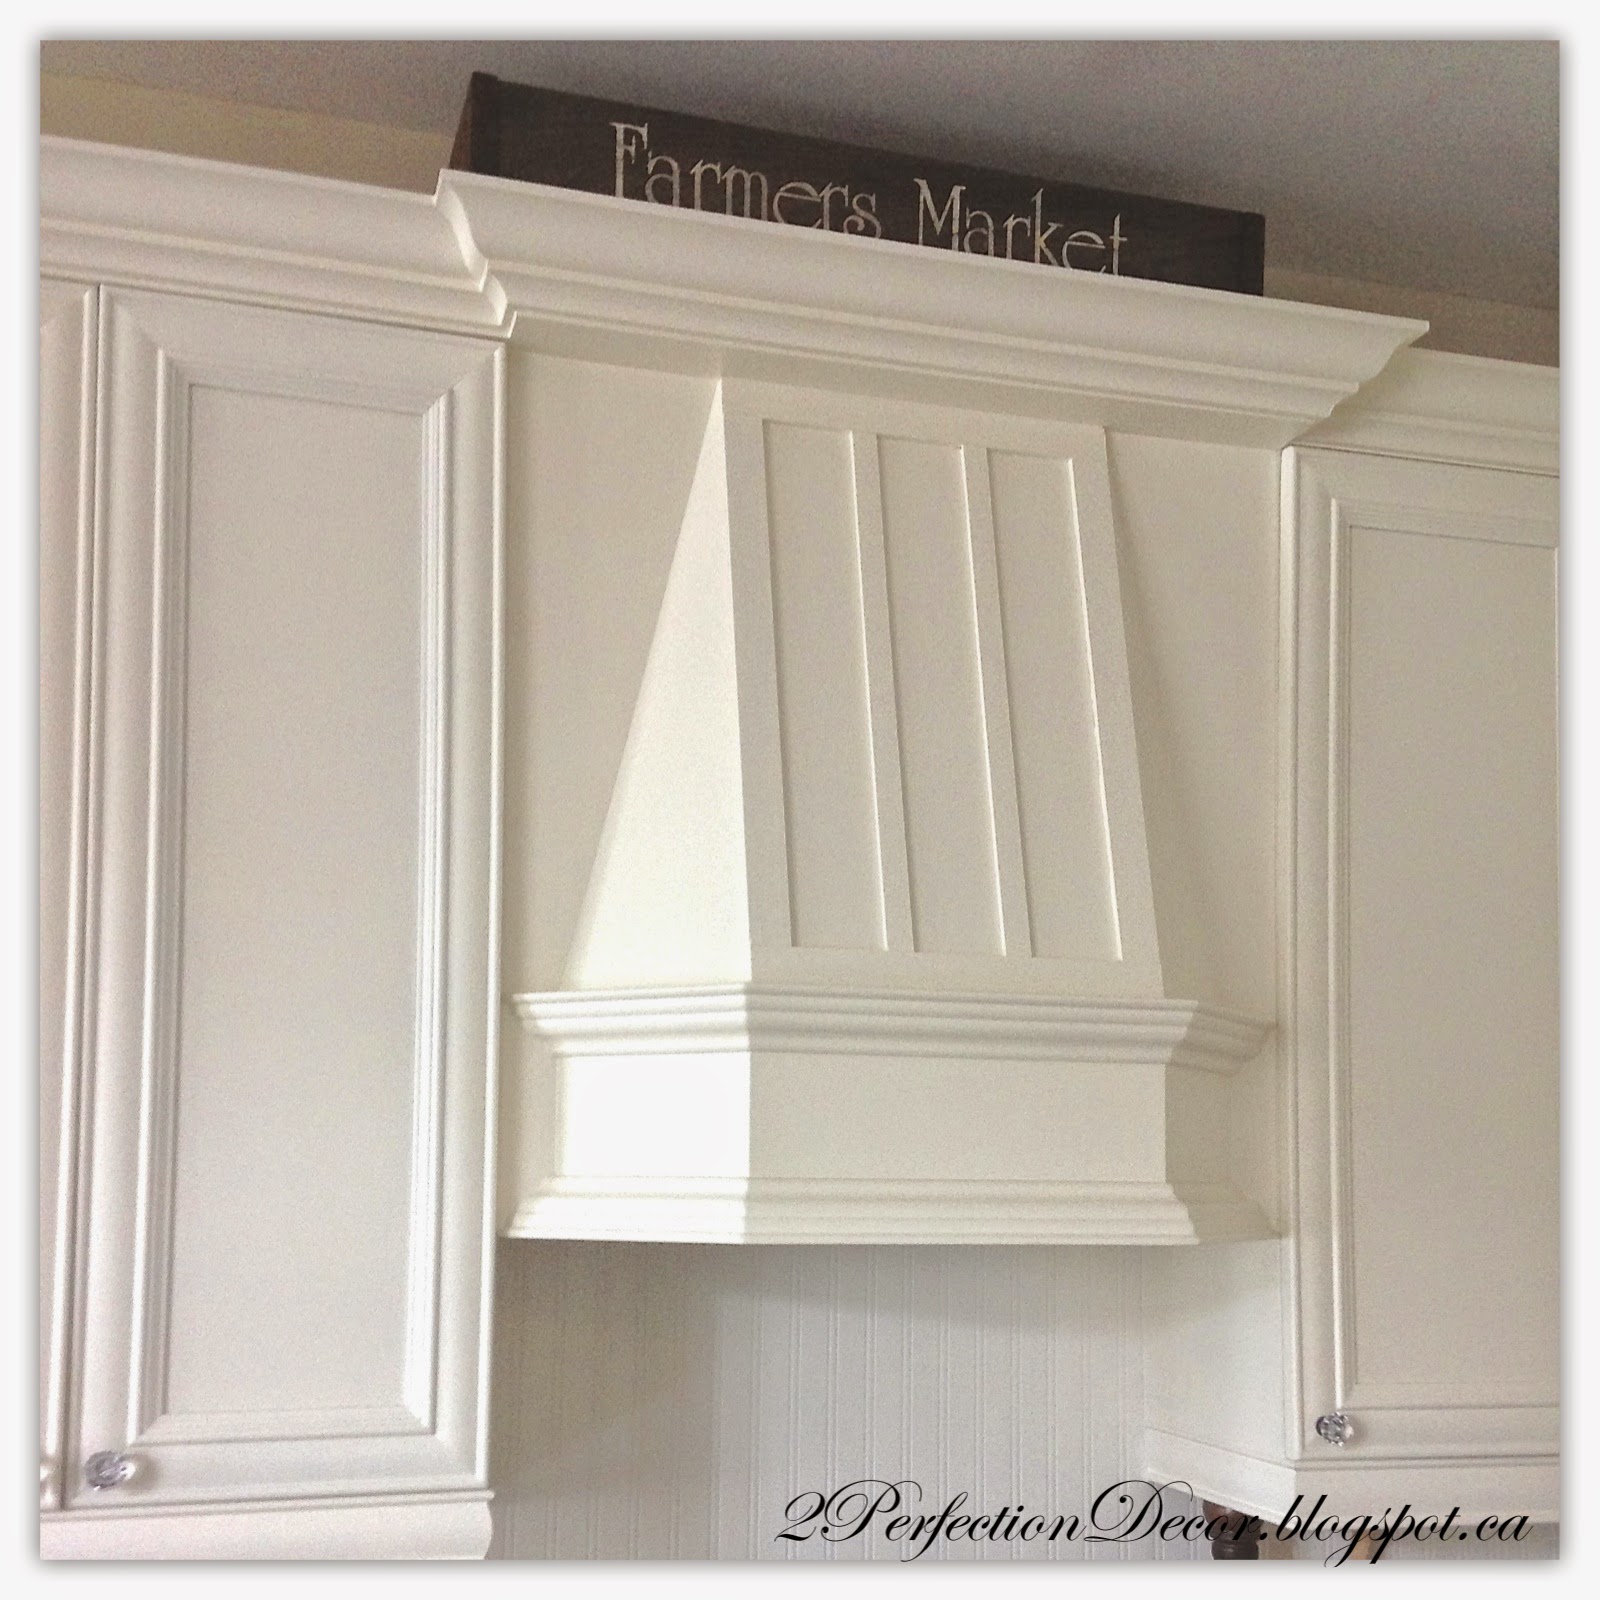 2perfection Decor Painted French Country Kitchen Reveal